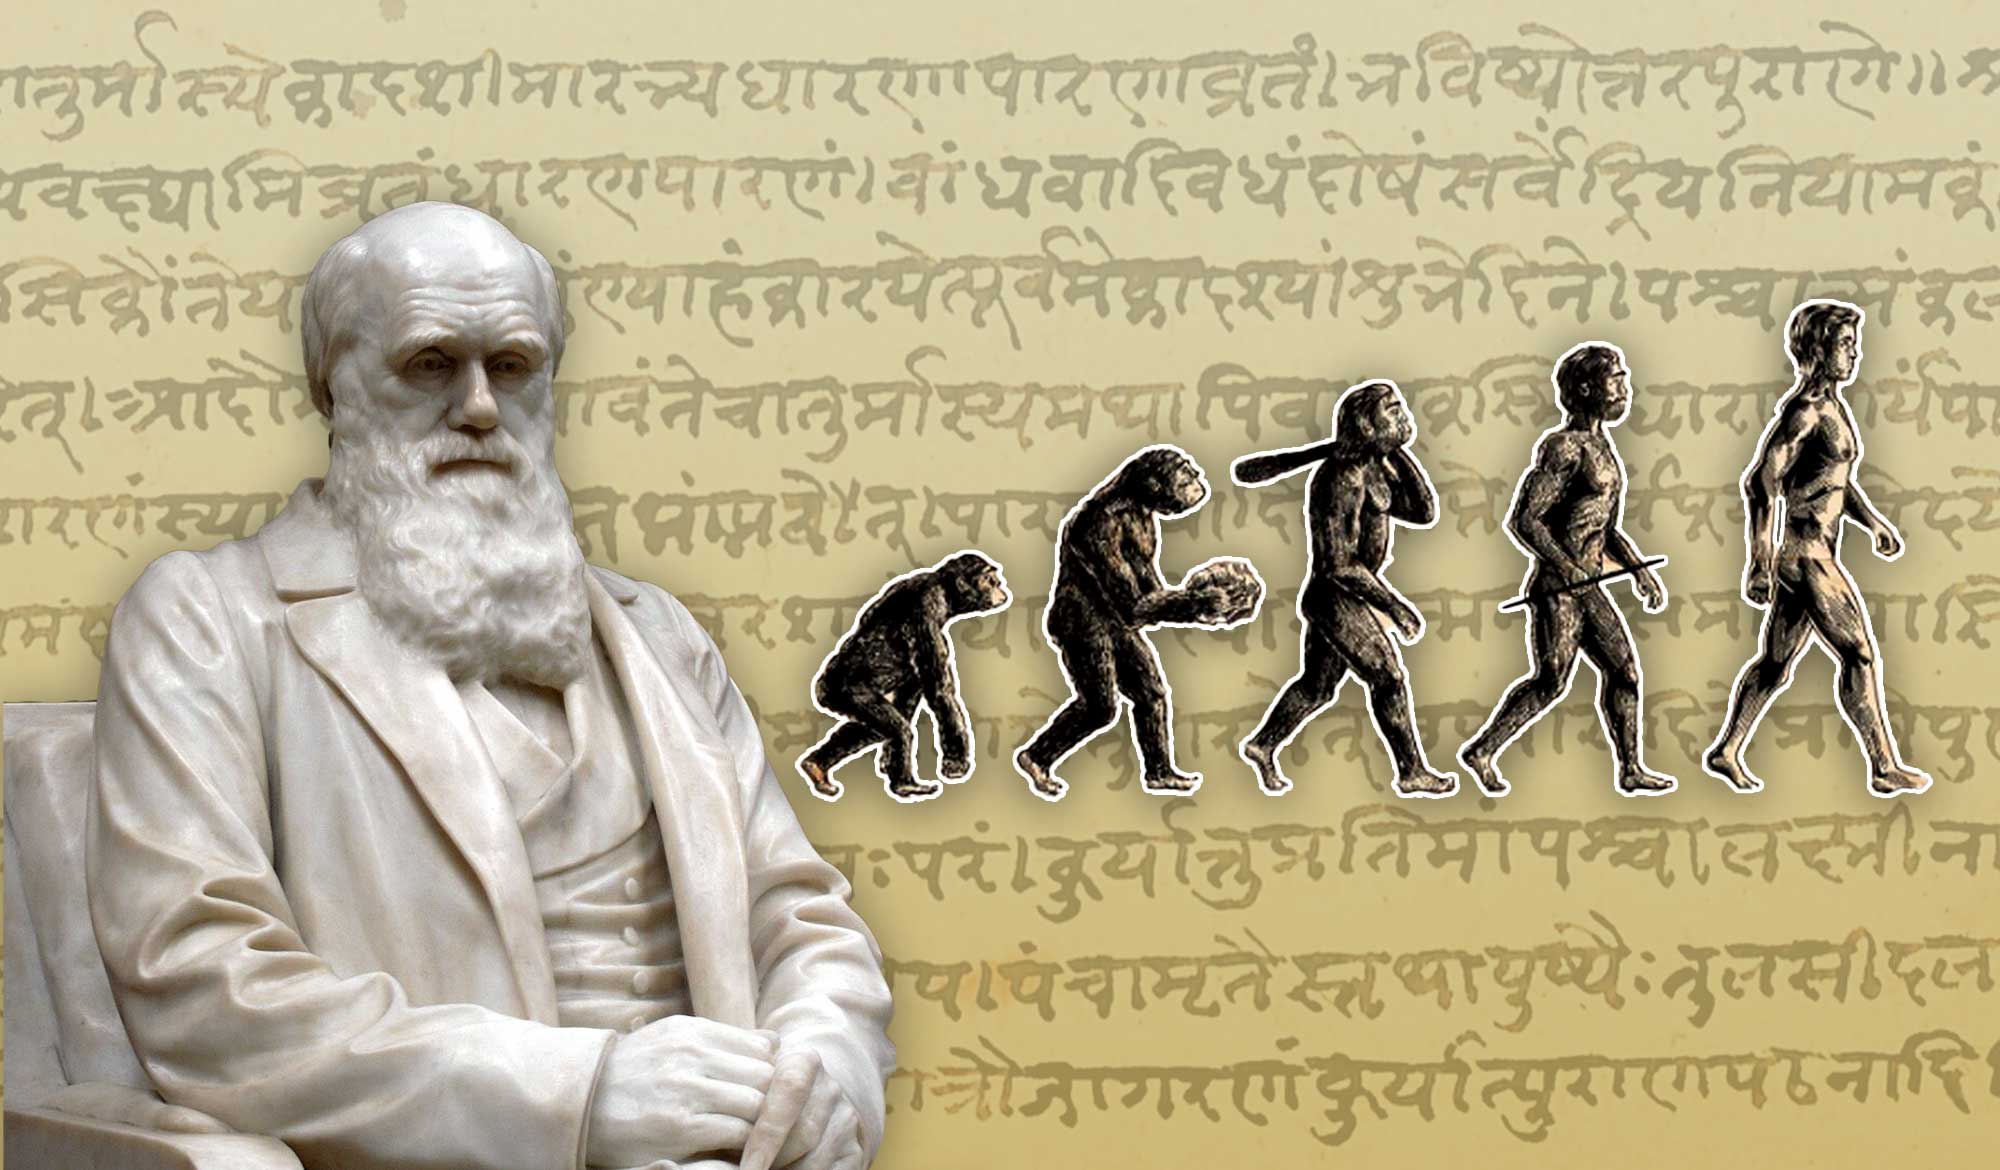 Did Darwin Borrow His Theory of Evolution from the Vedas?